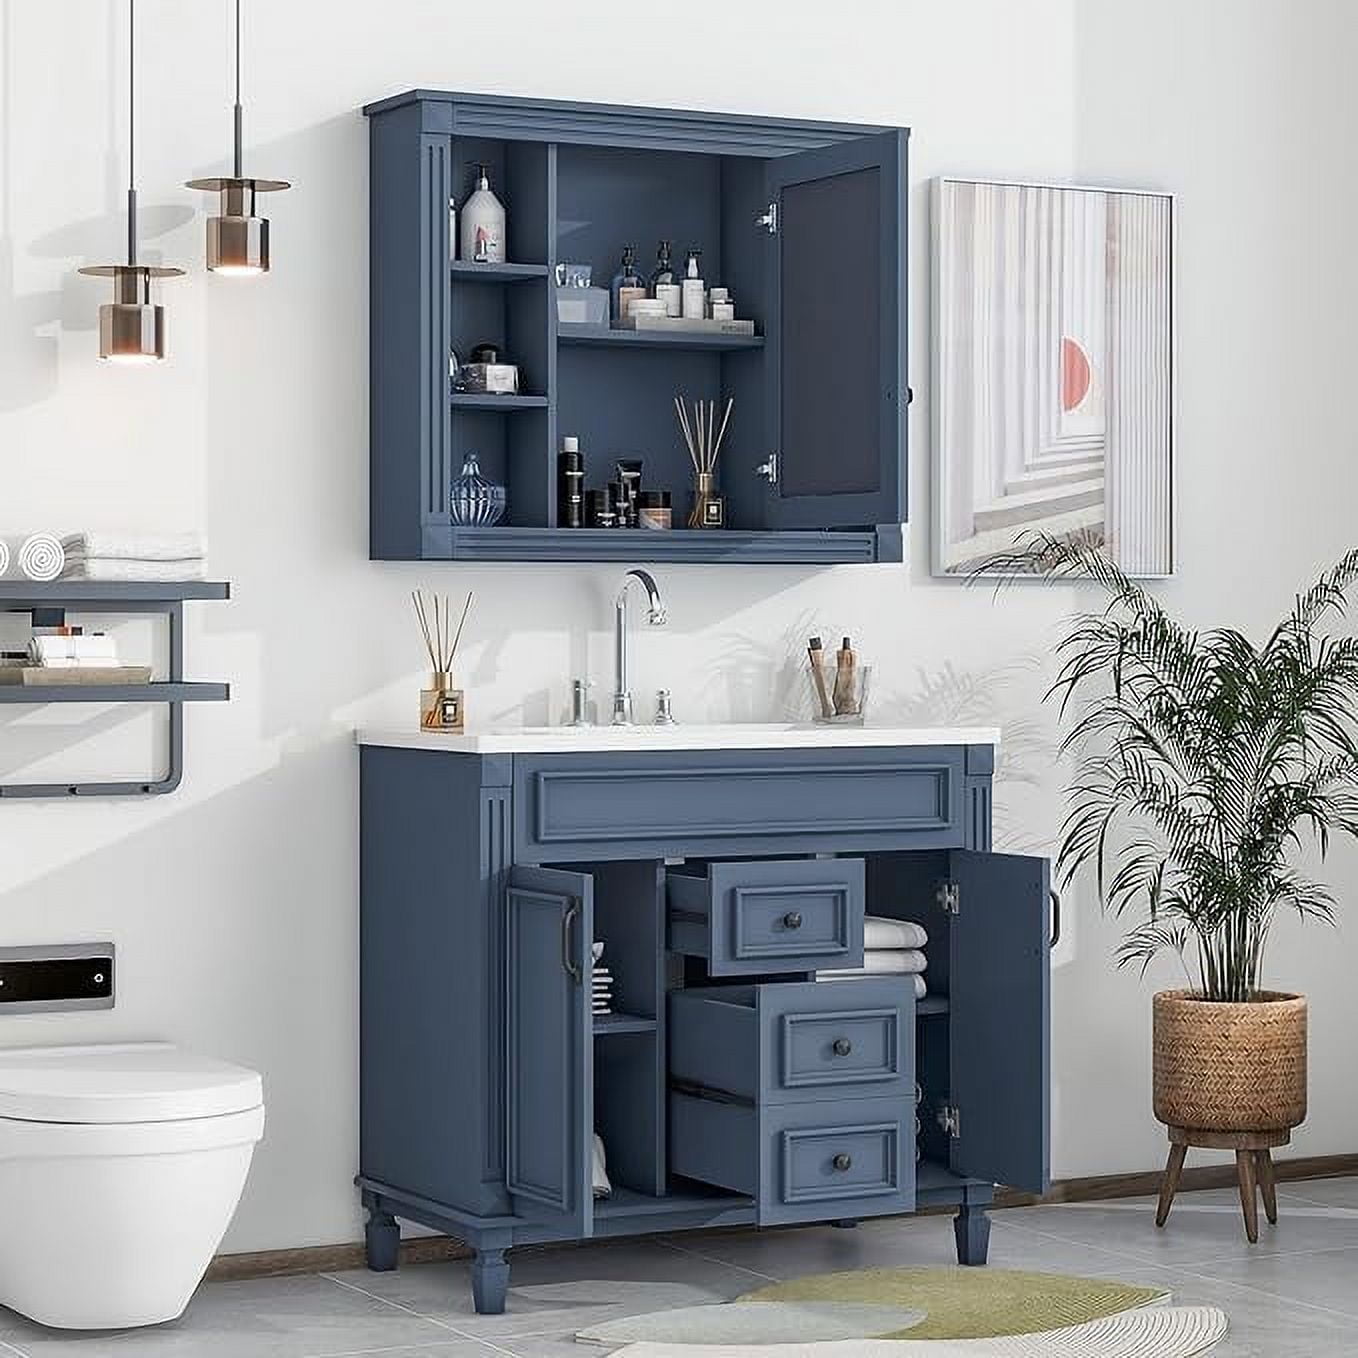 Lostcat 36inch Bathroom Vanity with Top Sink - Modern Bathroom Storage Cabinet with 2 Soft Closing Doors and 2 Drawers - Single Sink Bathroom Vanity - Bathroom Furniture Set with Mirror Cabinet (Blue)